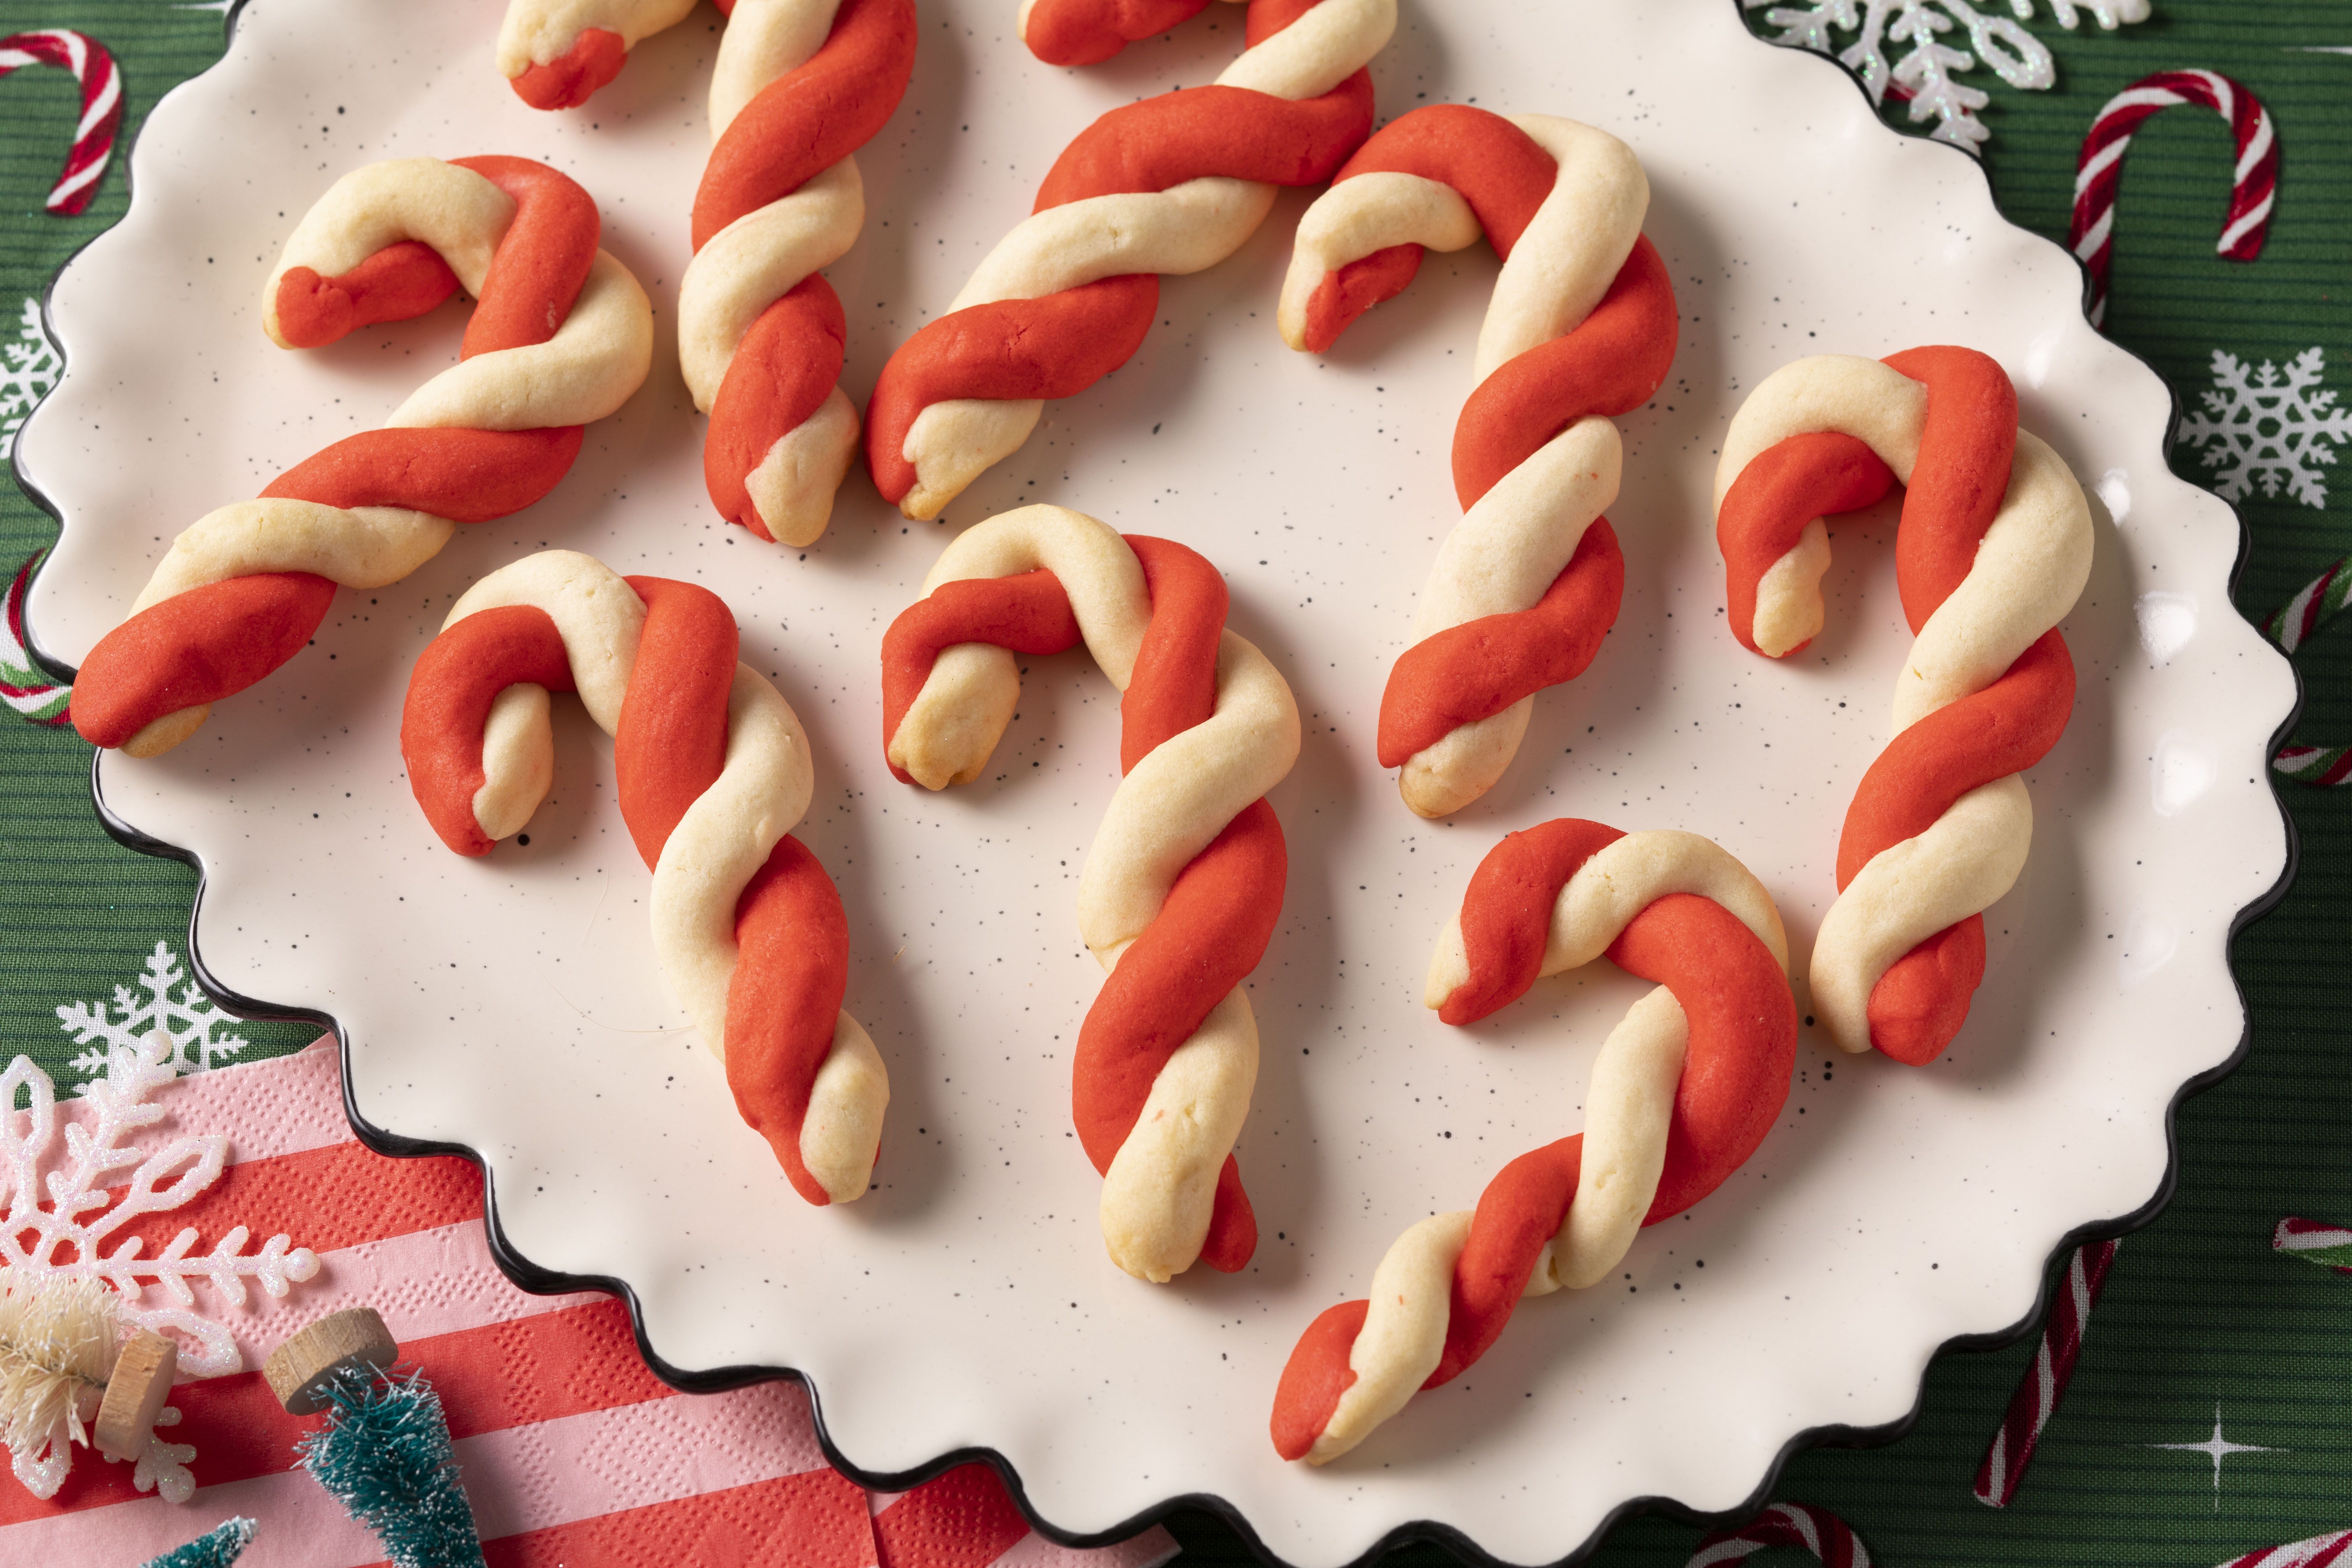 https://hips.hearstapps.com/hmg-prod/images/candy-cane-cookies-recipe-1636735663.jpg